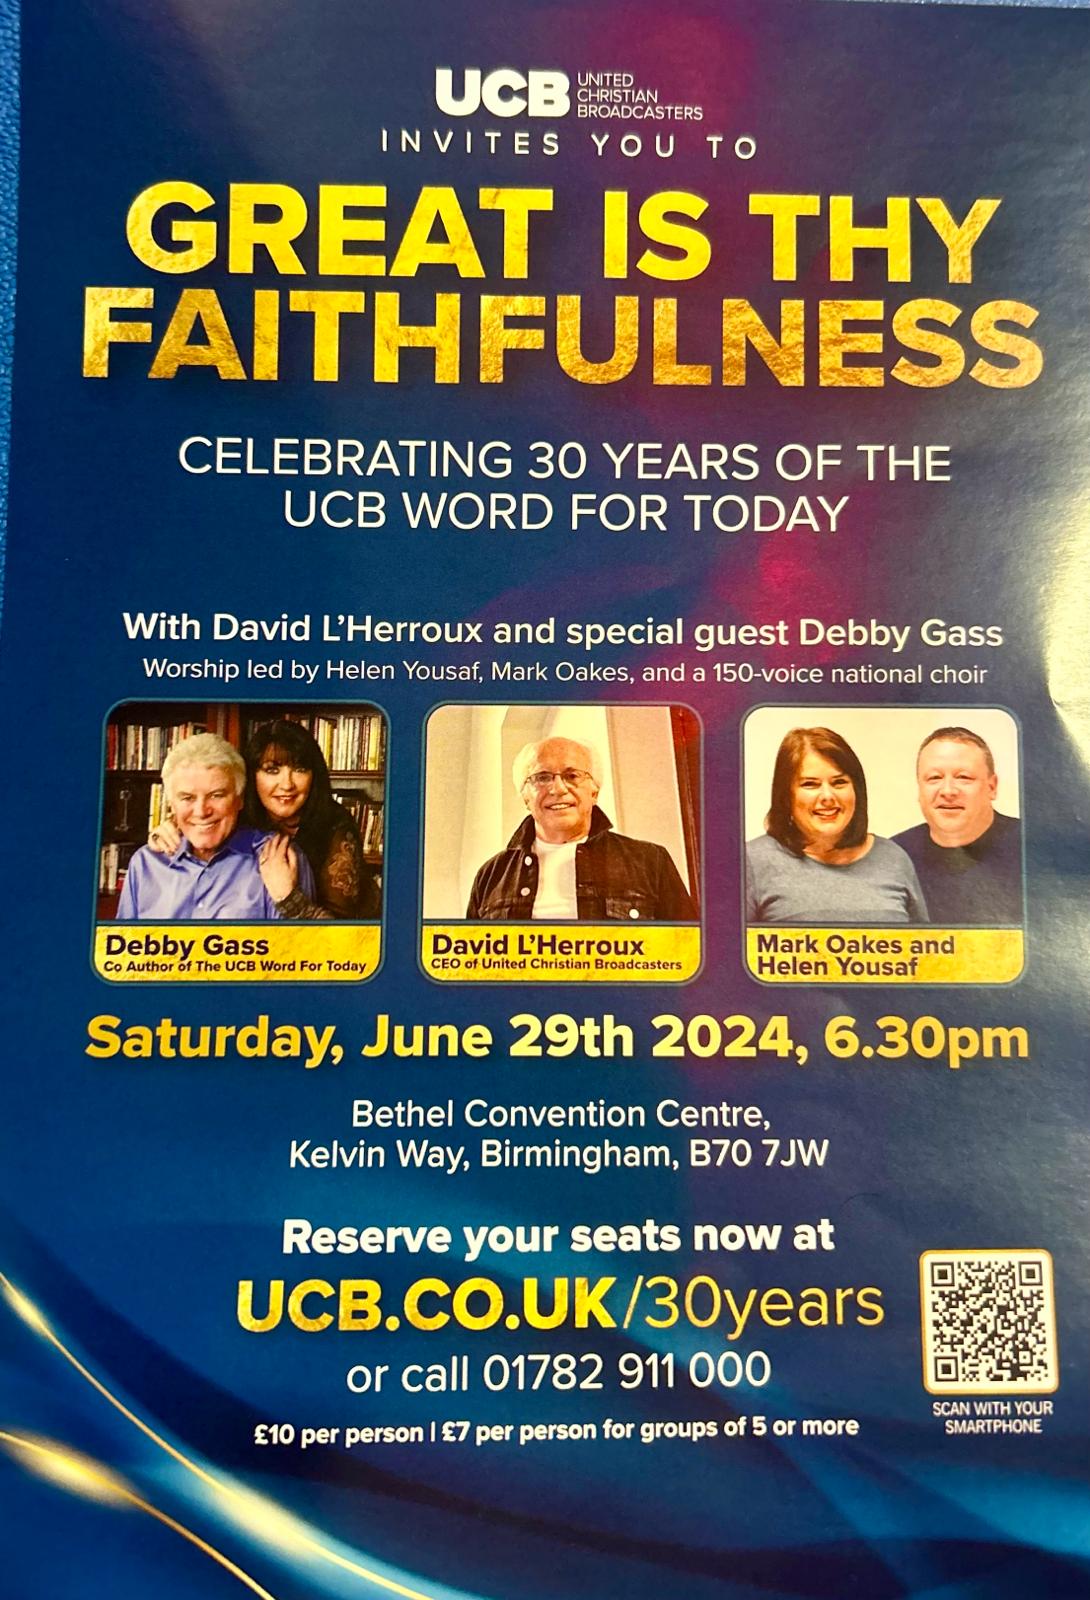 UCB Invites you to GREAT IS THY FAITHFULNESS